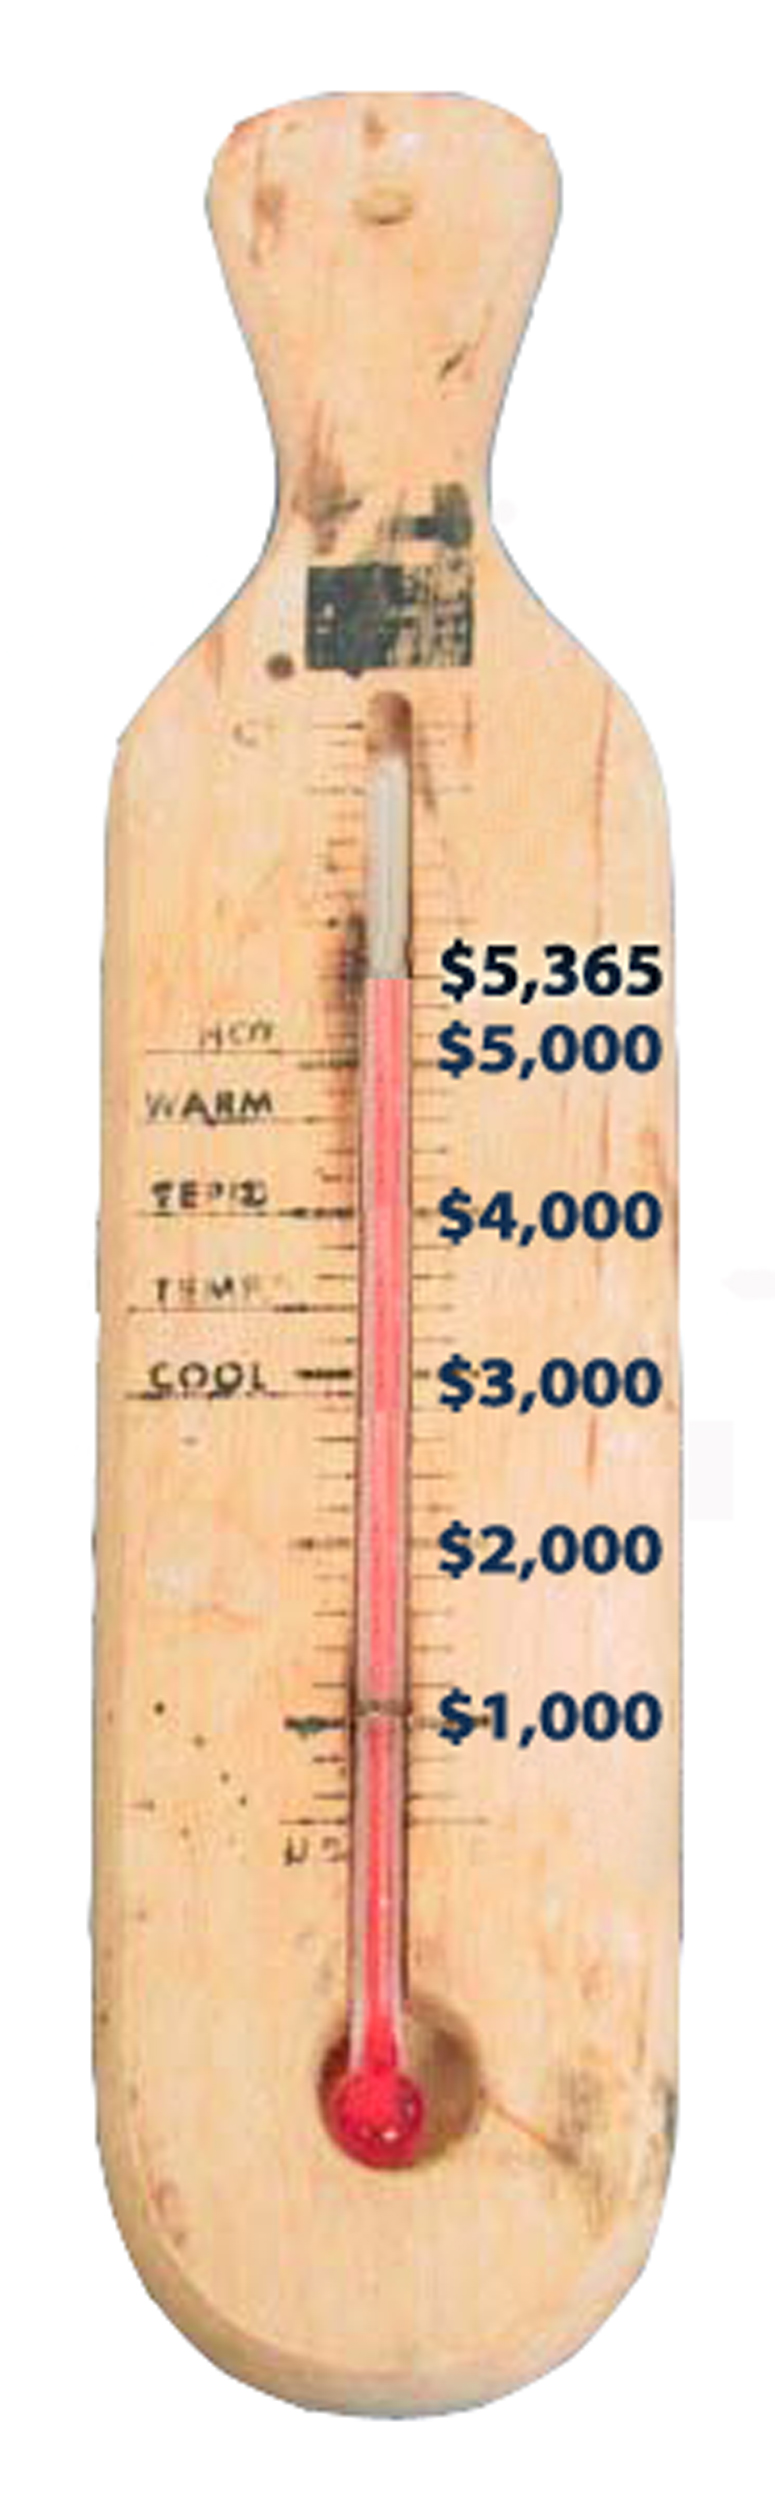 Themometer for 2009 Matching Gift Campaign